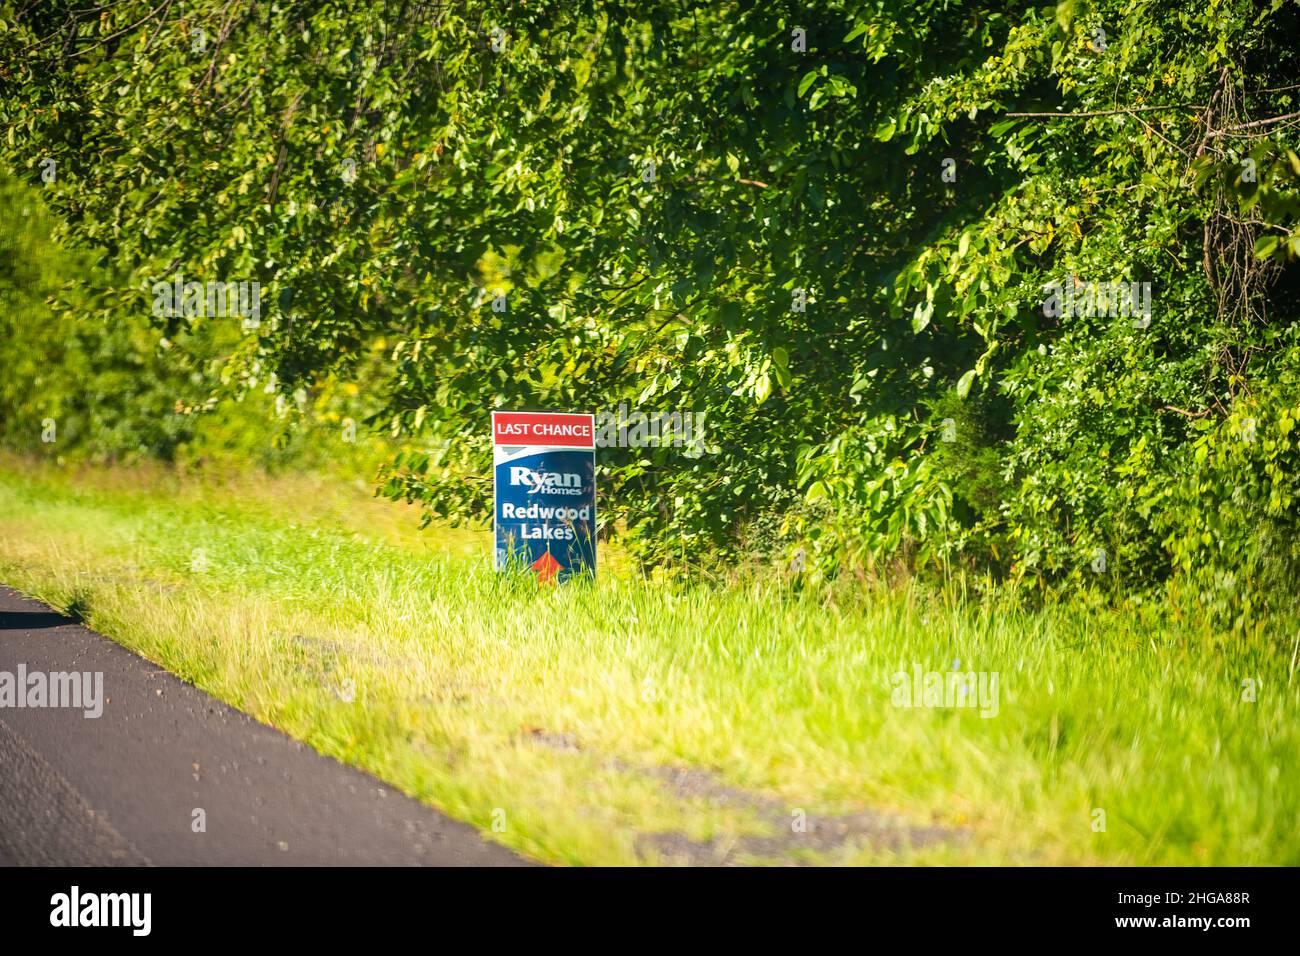 Culpeper, USA - August 30, 2020: Advertisement street sign in rural Virginia for last chance text for Ryan homes builder new modern community called R Stock Photo